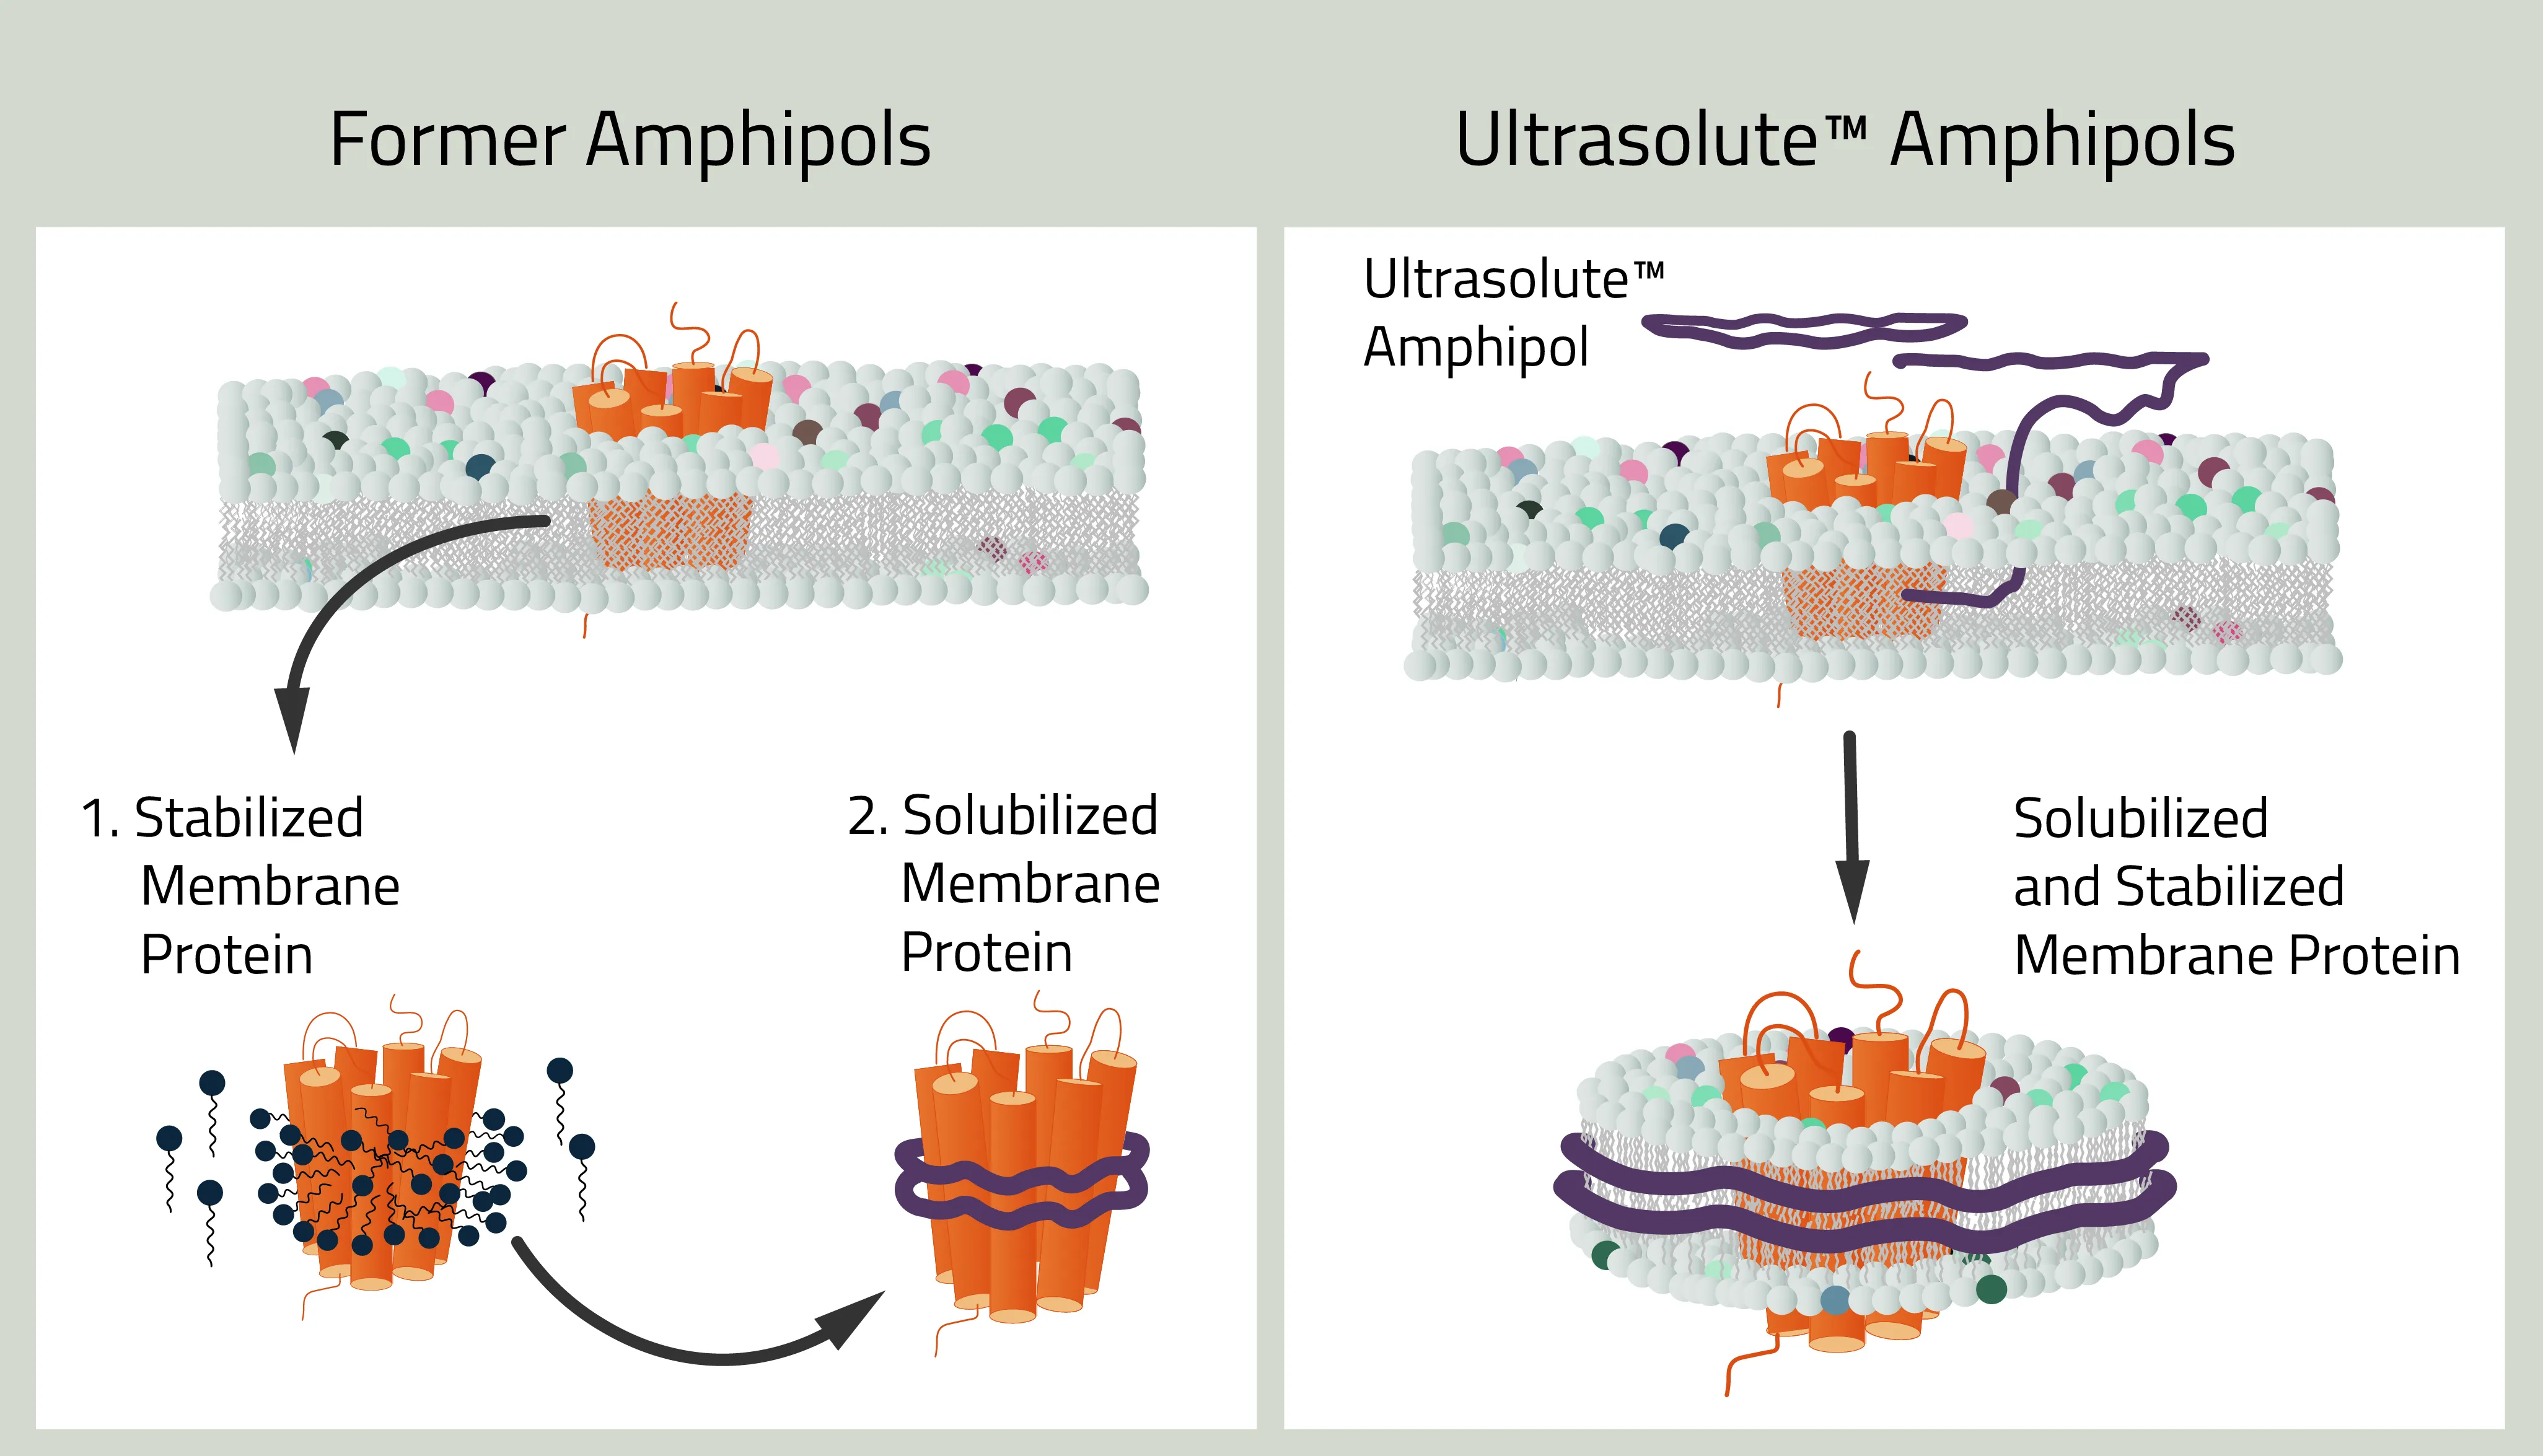 Old amphipols compared to the new Ultrasolute™ Amphipols